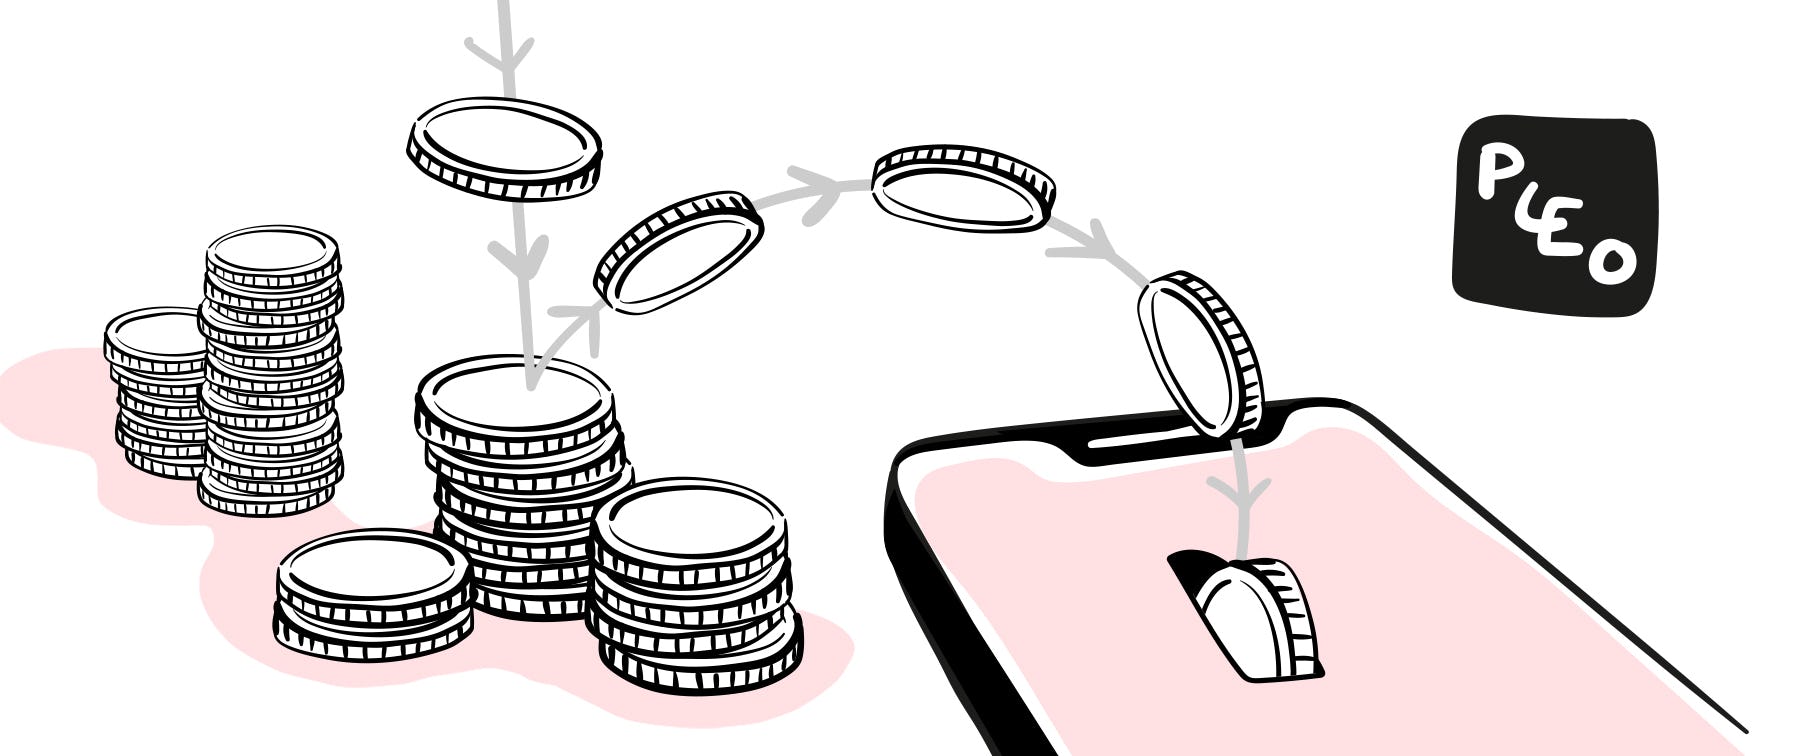 An illustration of coins and a phone.